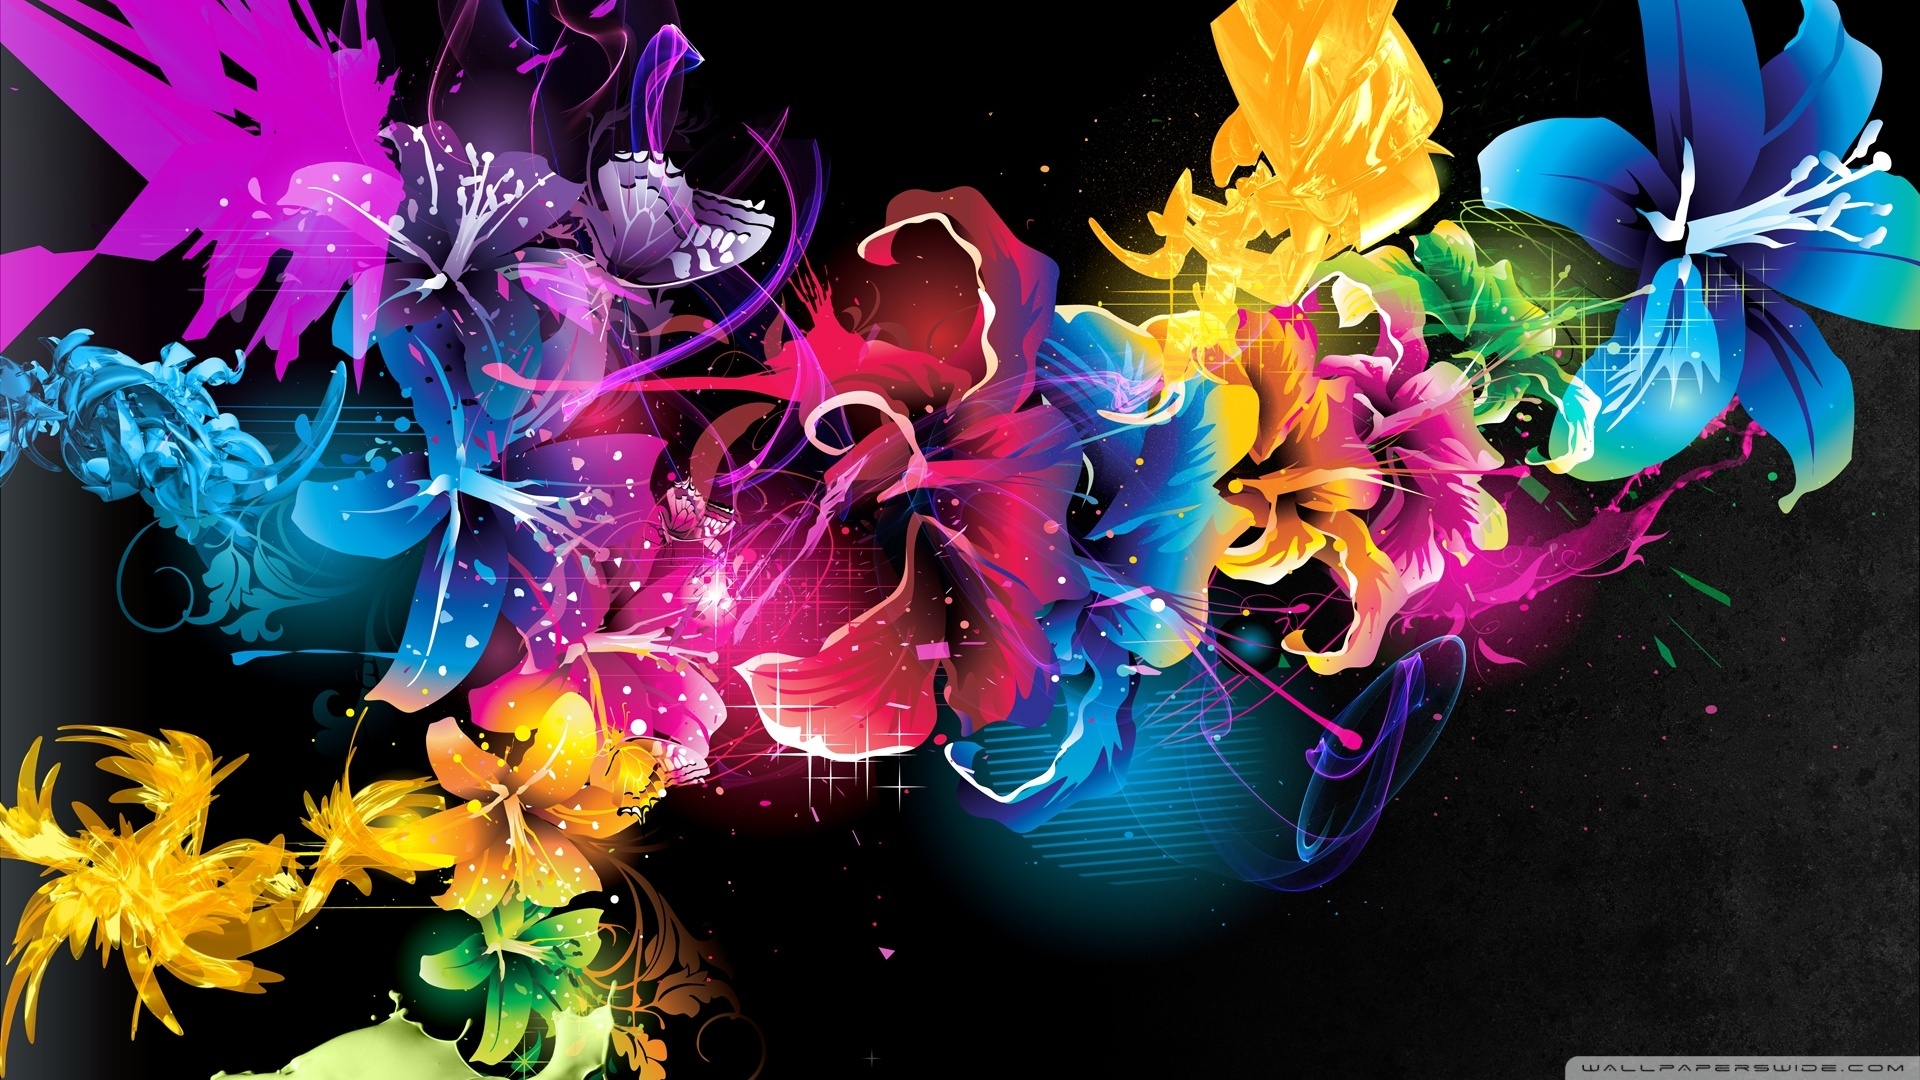 Colorful Flowers 8 Wallpaper 1920x1080 Colorful Flowers 8 1920x1080